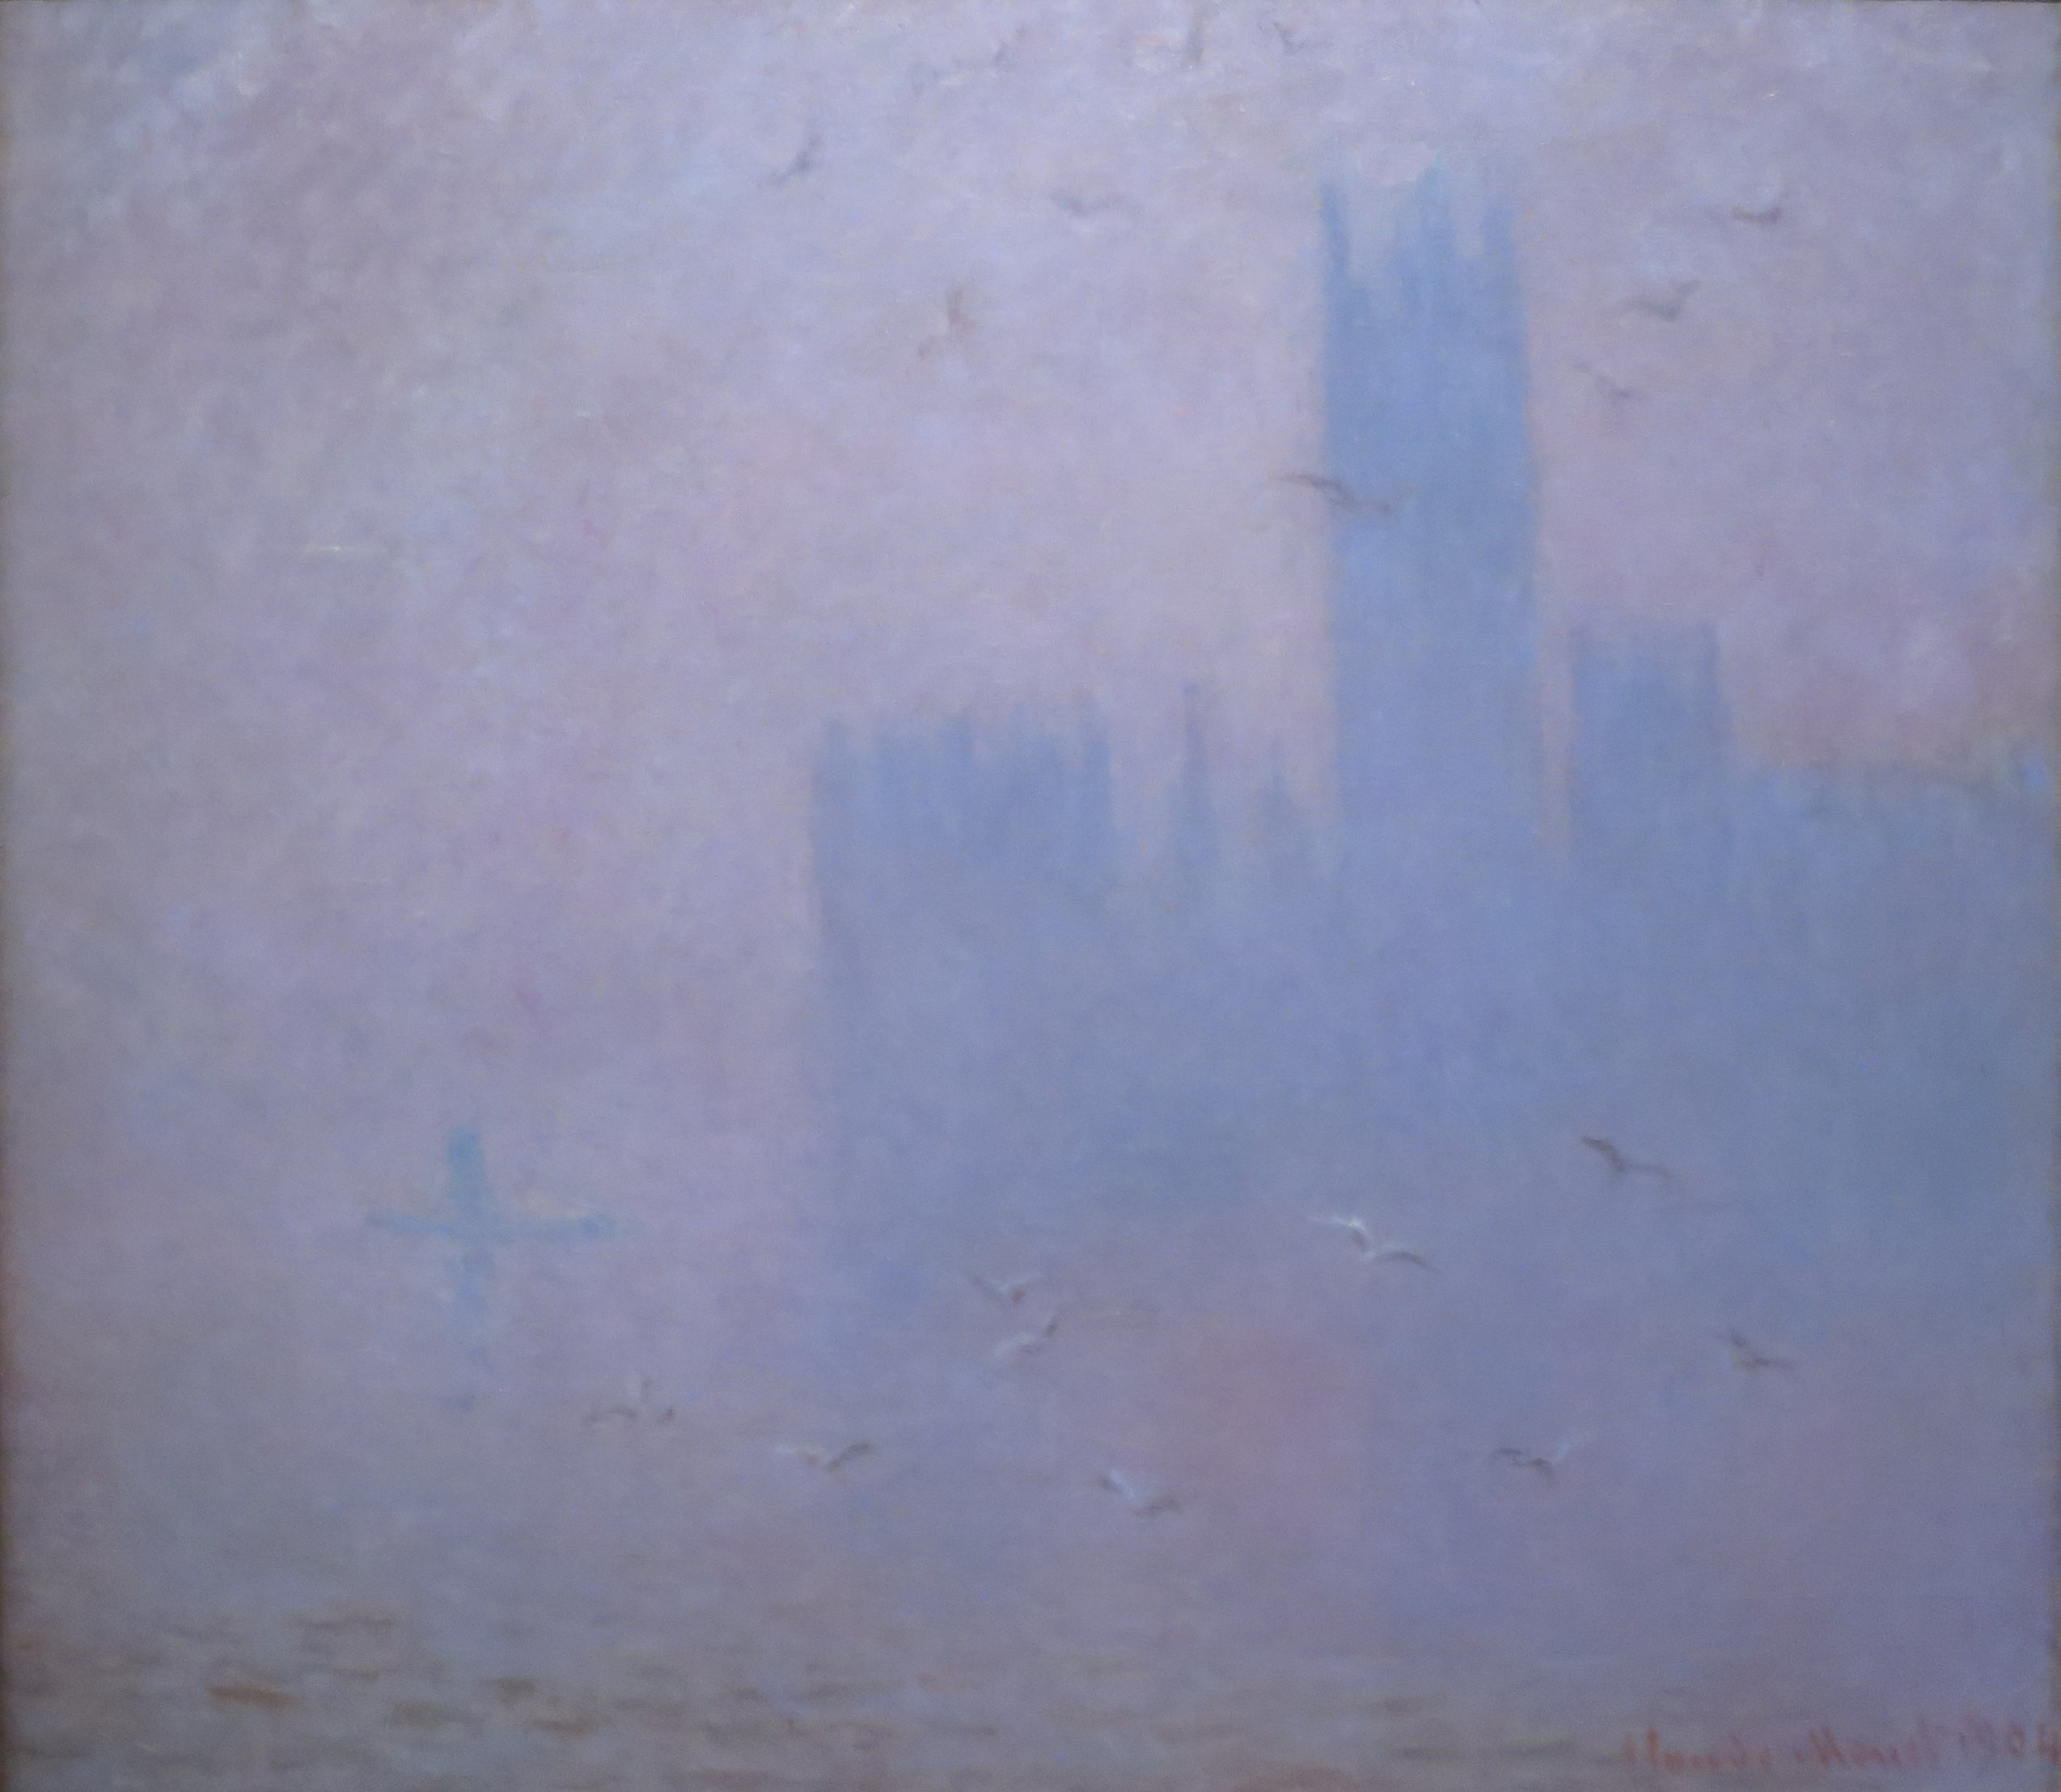 14 Seagulls,_the_Thames_&_Houses_of_Parliament_by_Claude_Monet,_Pushkin_Museum_Seagulls, the River Thames and the Houses of Parliament, 1904, Pushkin